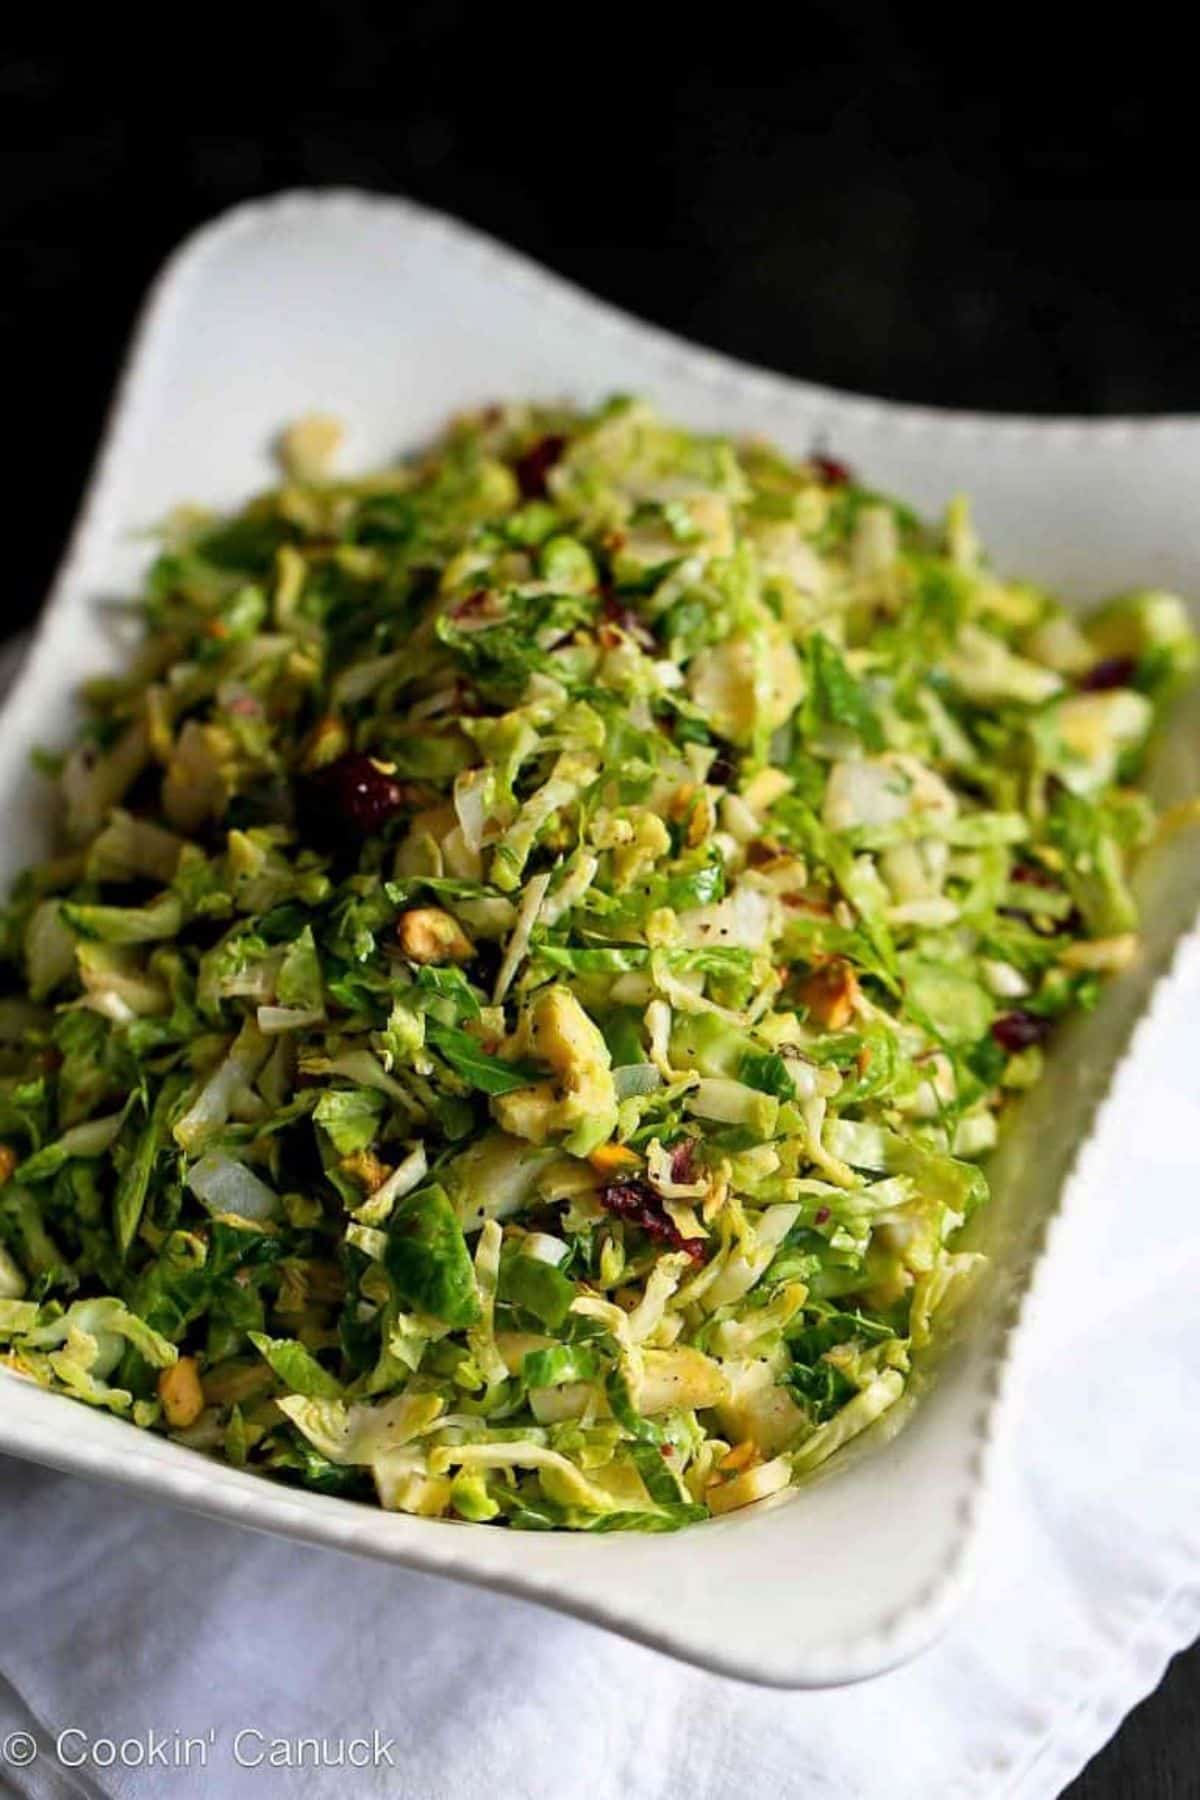 Healthy Shredded Brussels Sprouts with Pistachios, Cranberries & Parmesan in a white bowl.